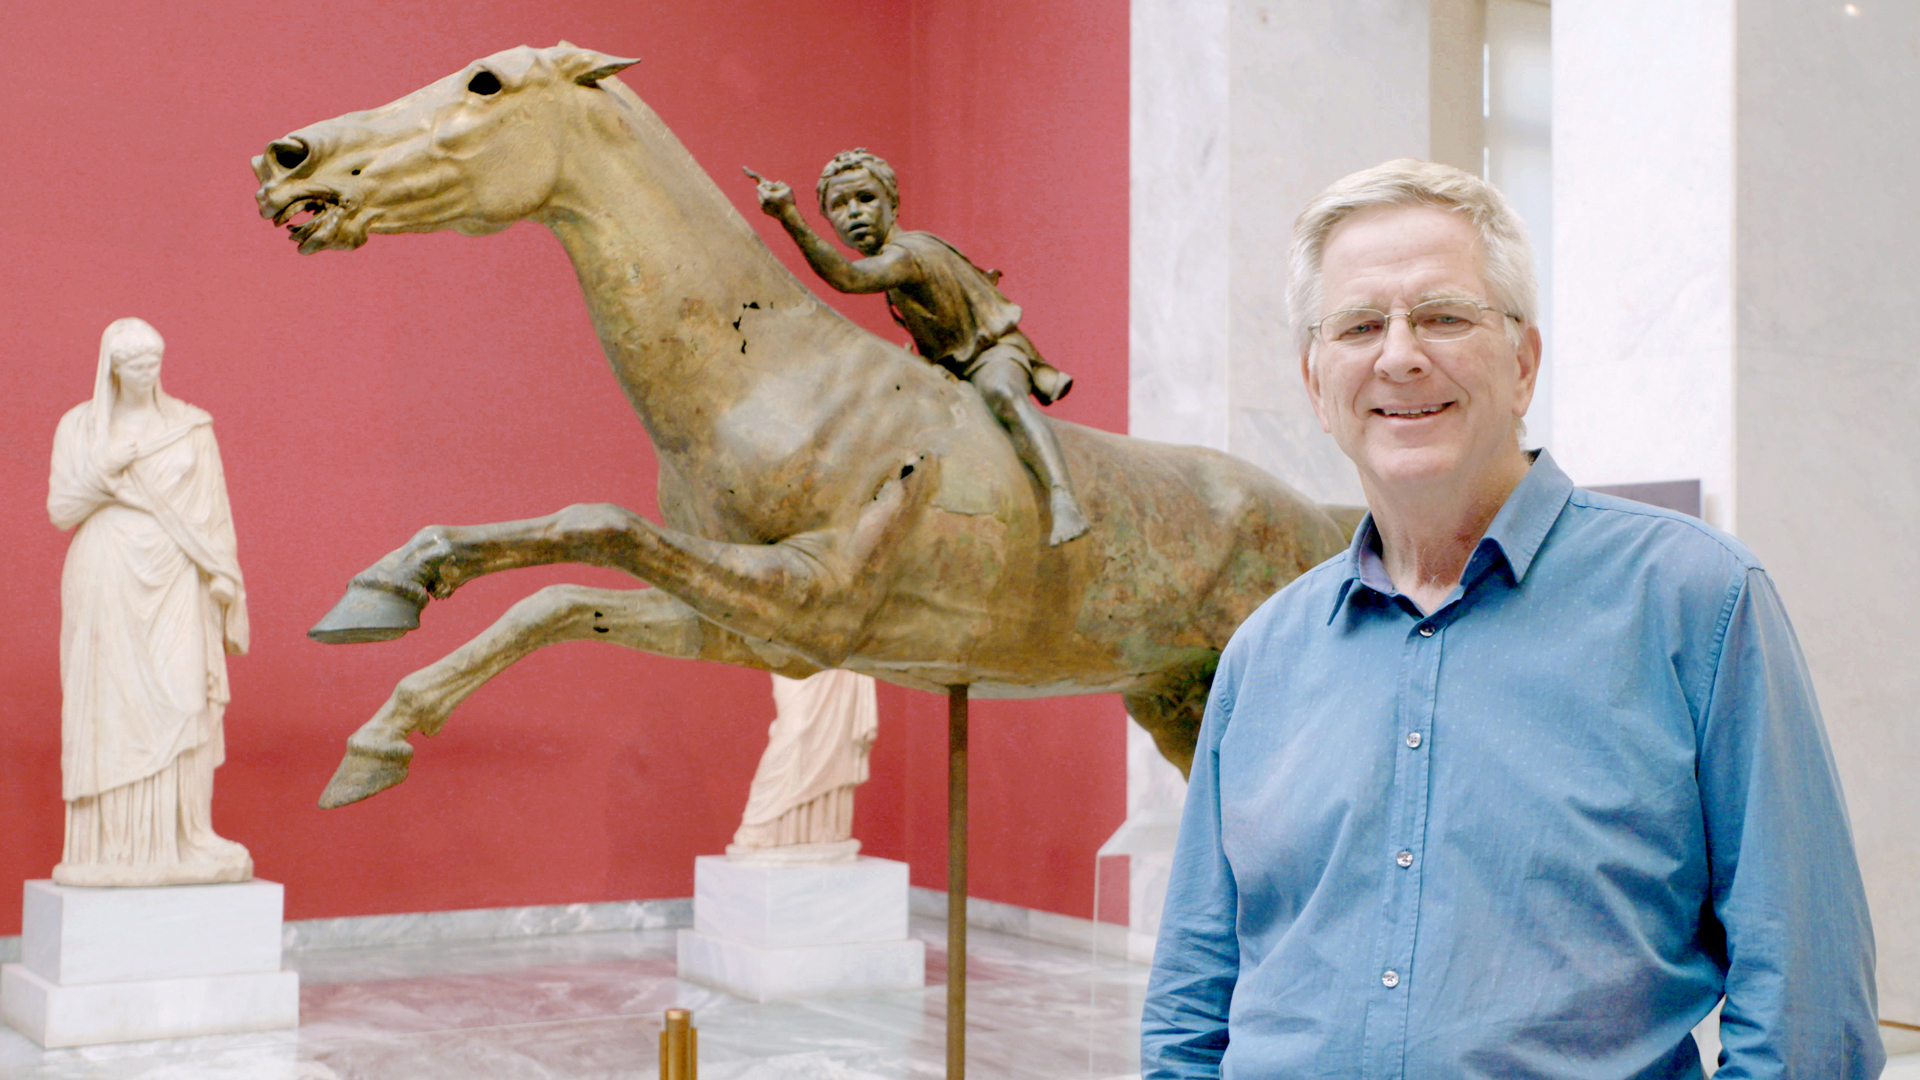 Rick and the Jockey of Artemision (150 to 140 bc), at the National Archaeological Museum, Athens. Photo: Rick Steves’ Europe.